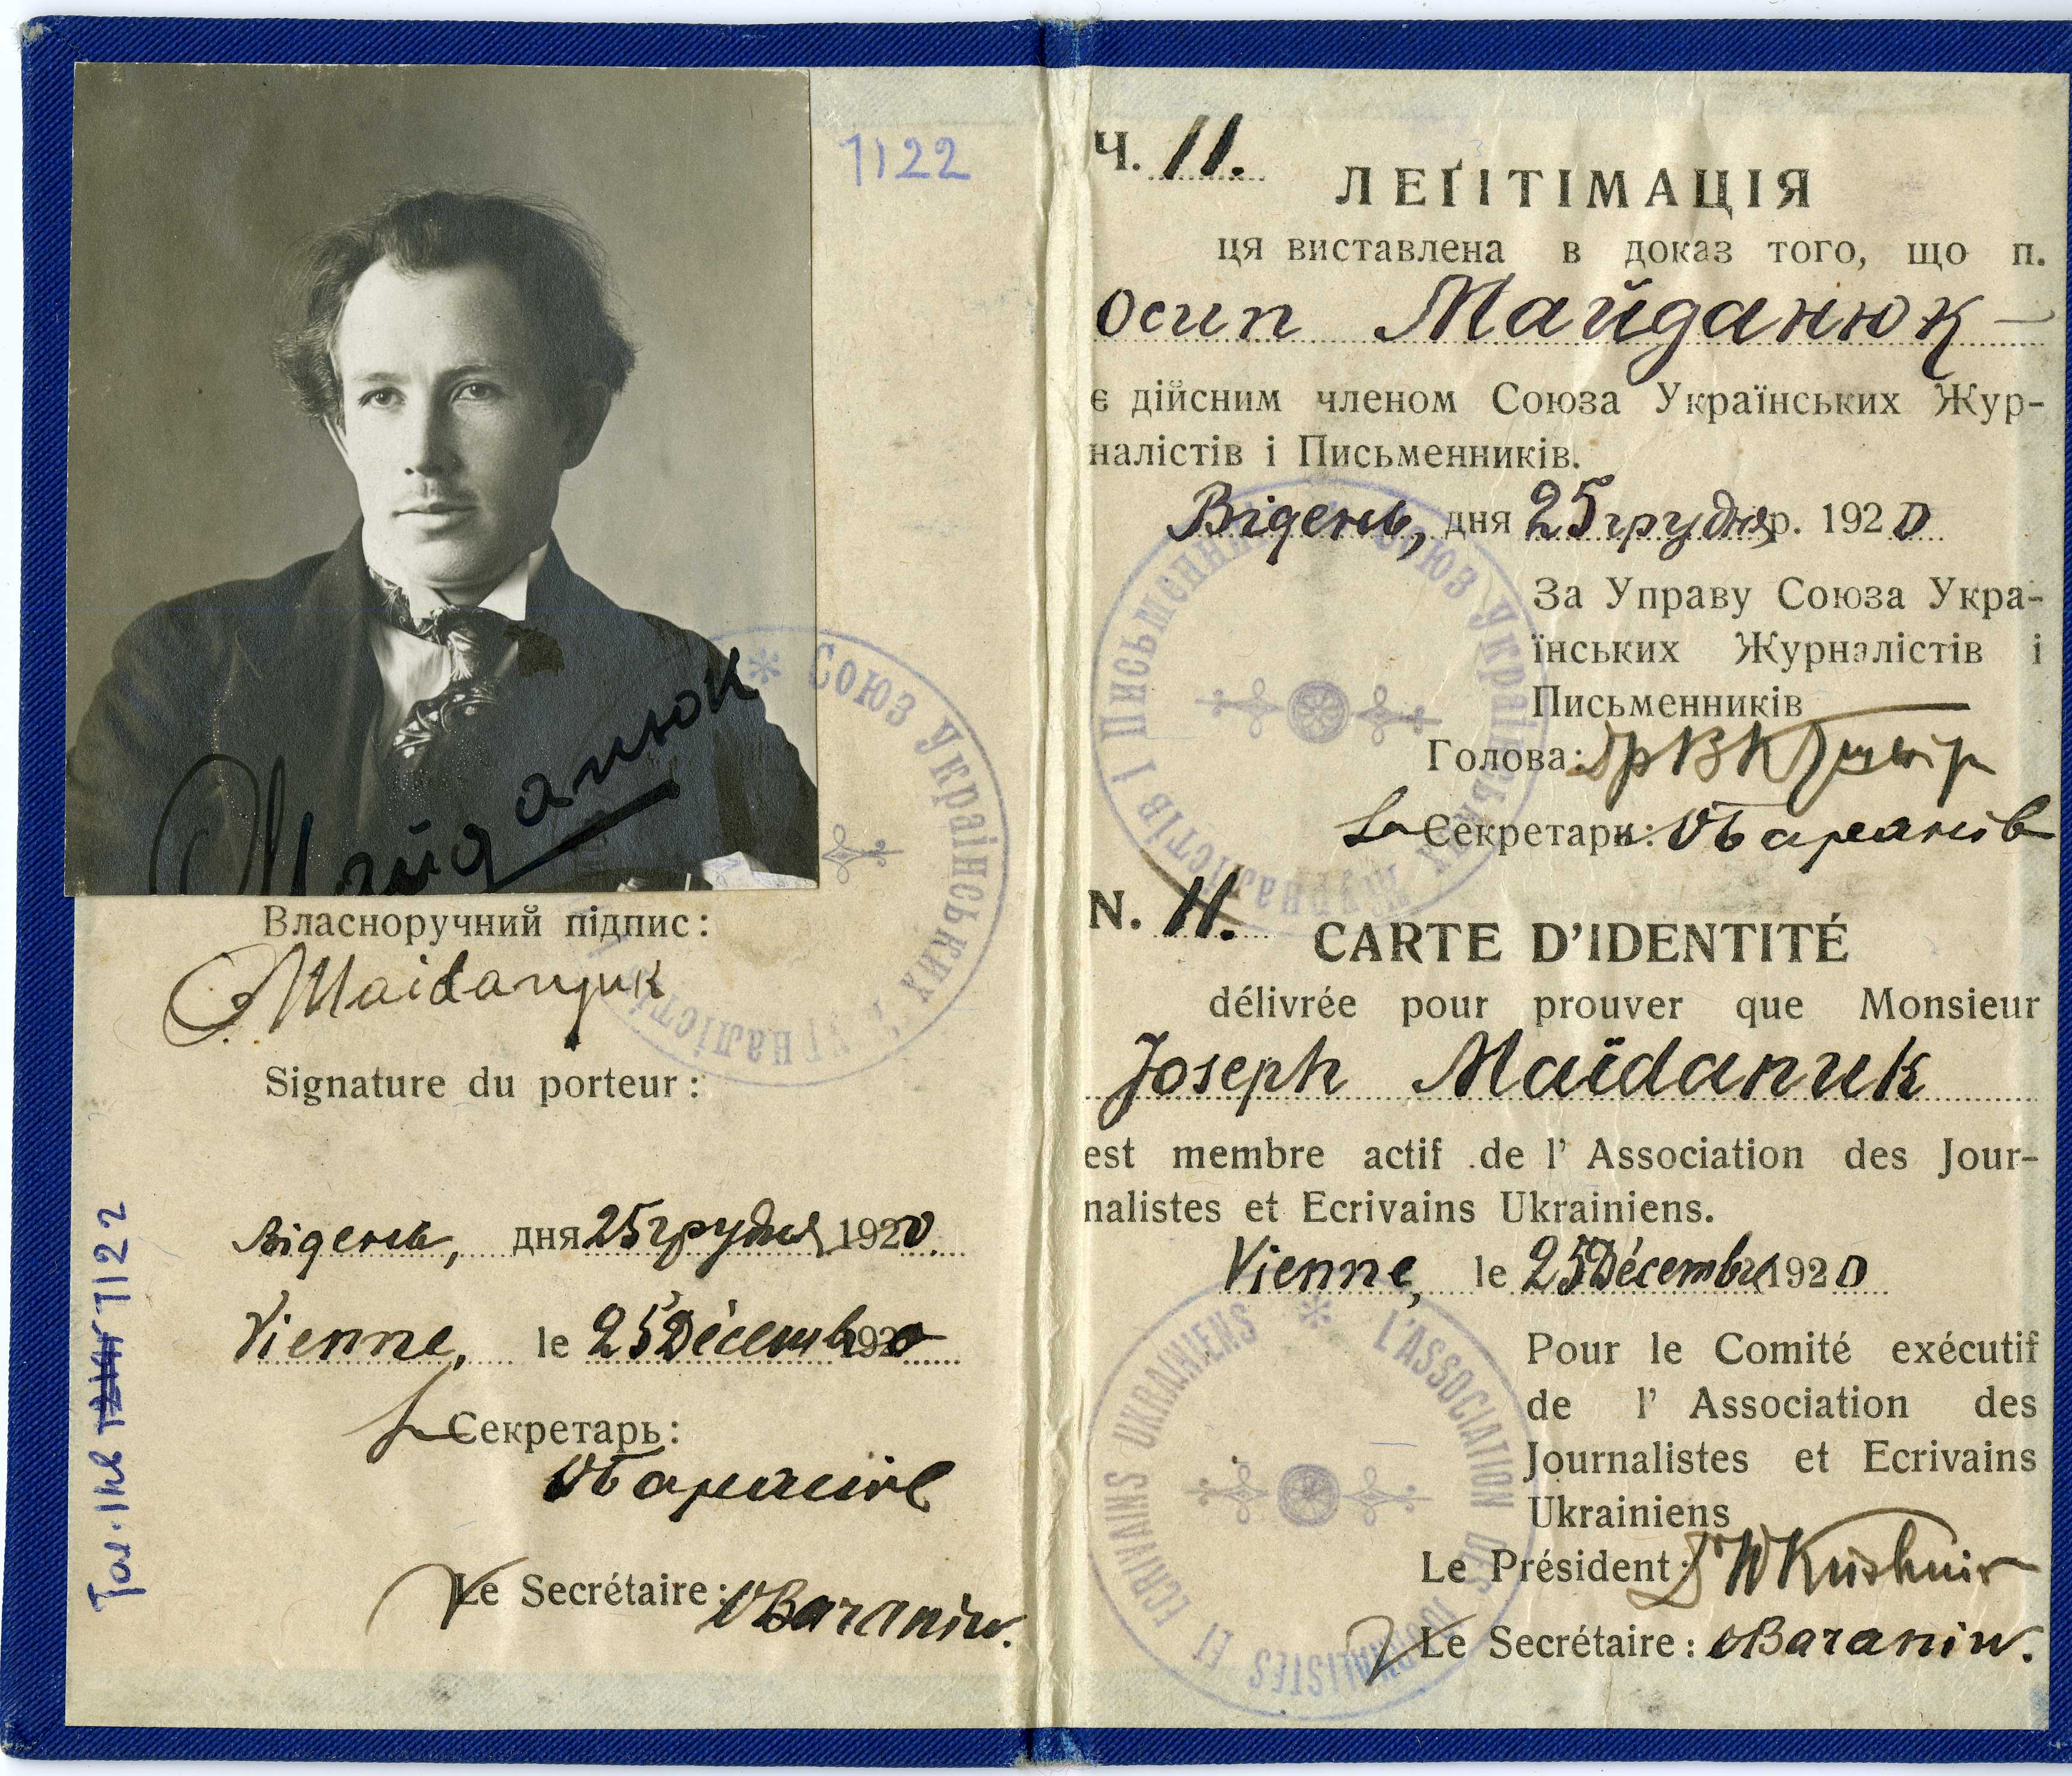 Osyp Maidaniuk's ID card, certifying that he is a member of the Union of Ukrainian Journalists and Writers. Issued in Vienna on December 25, 1920. 